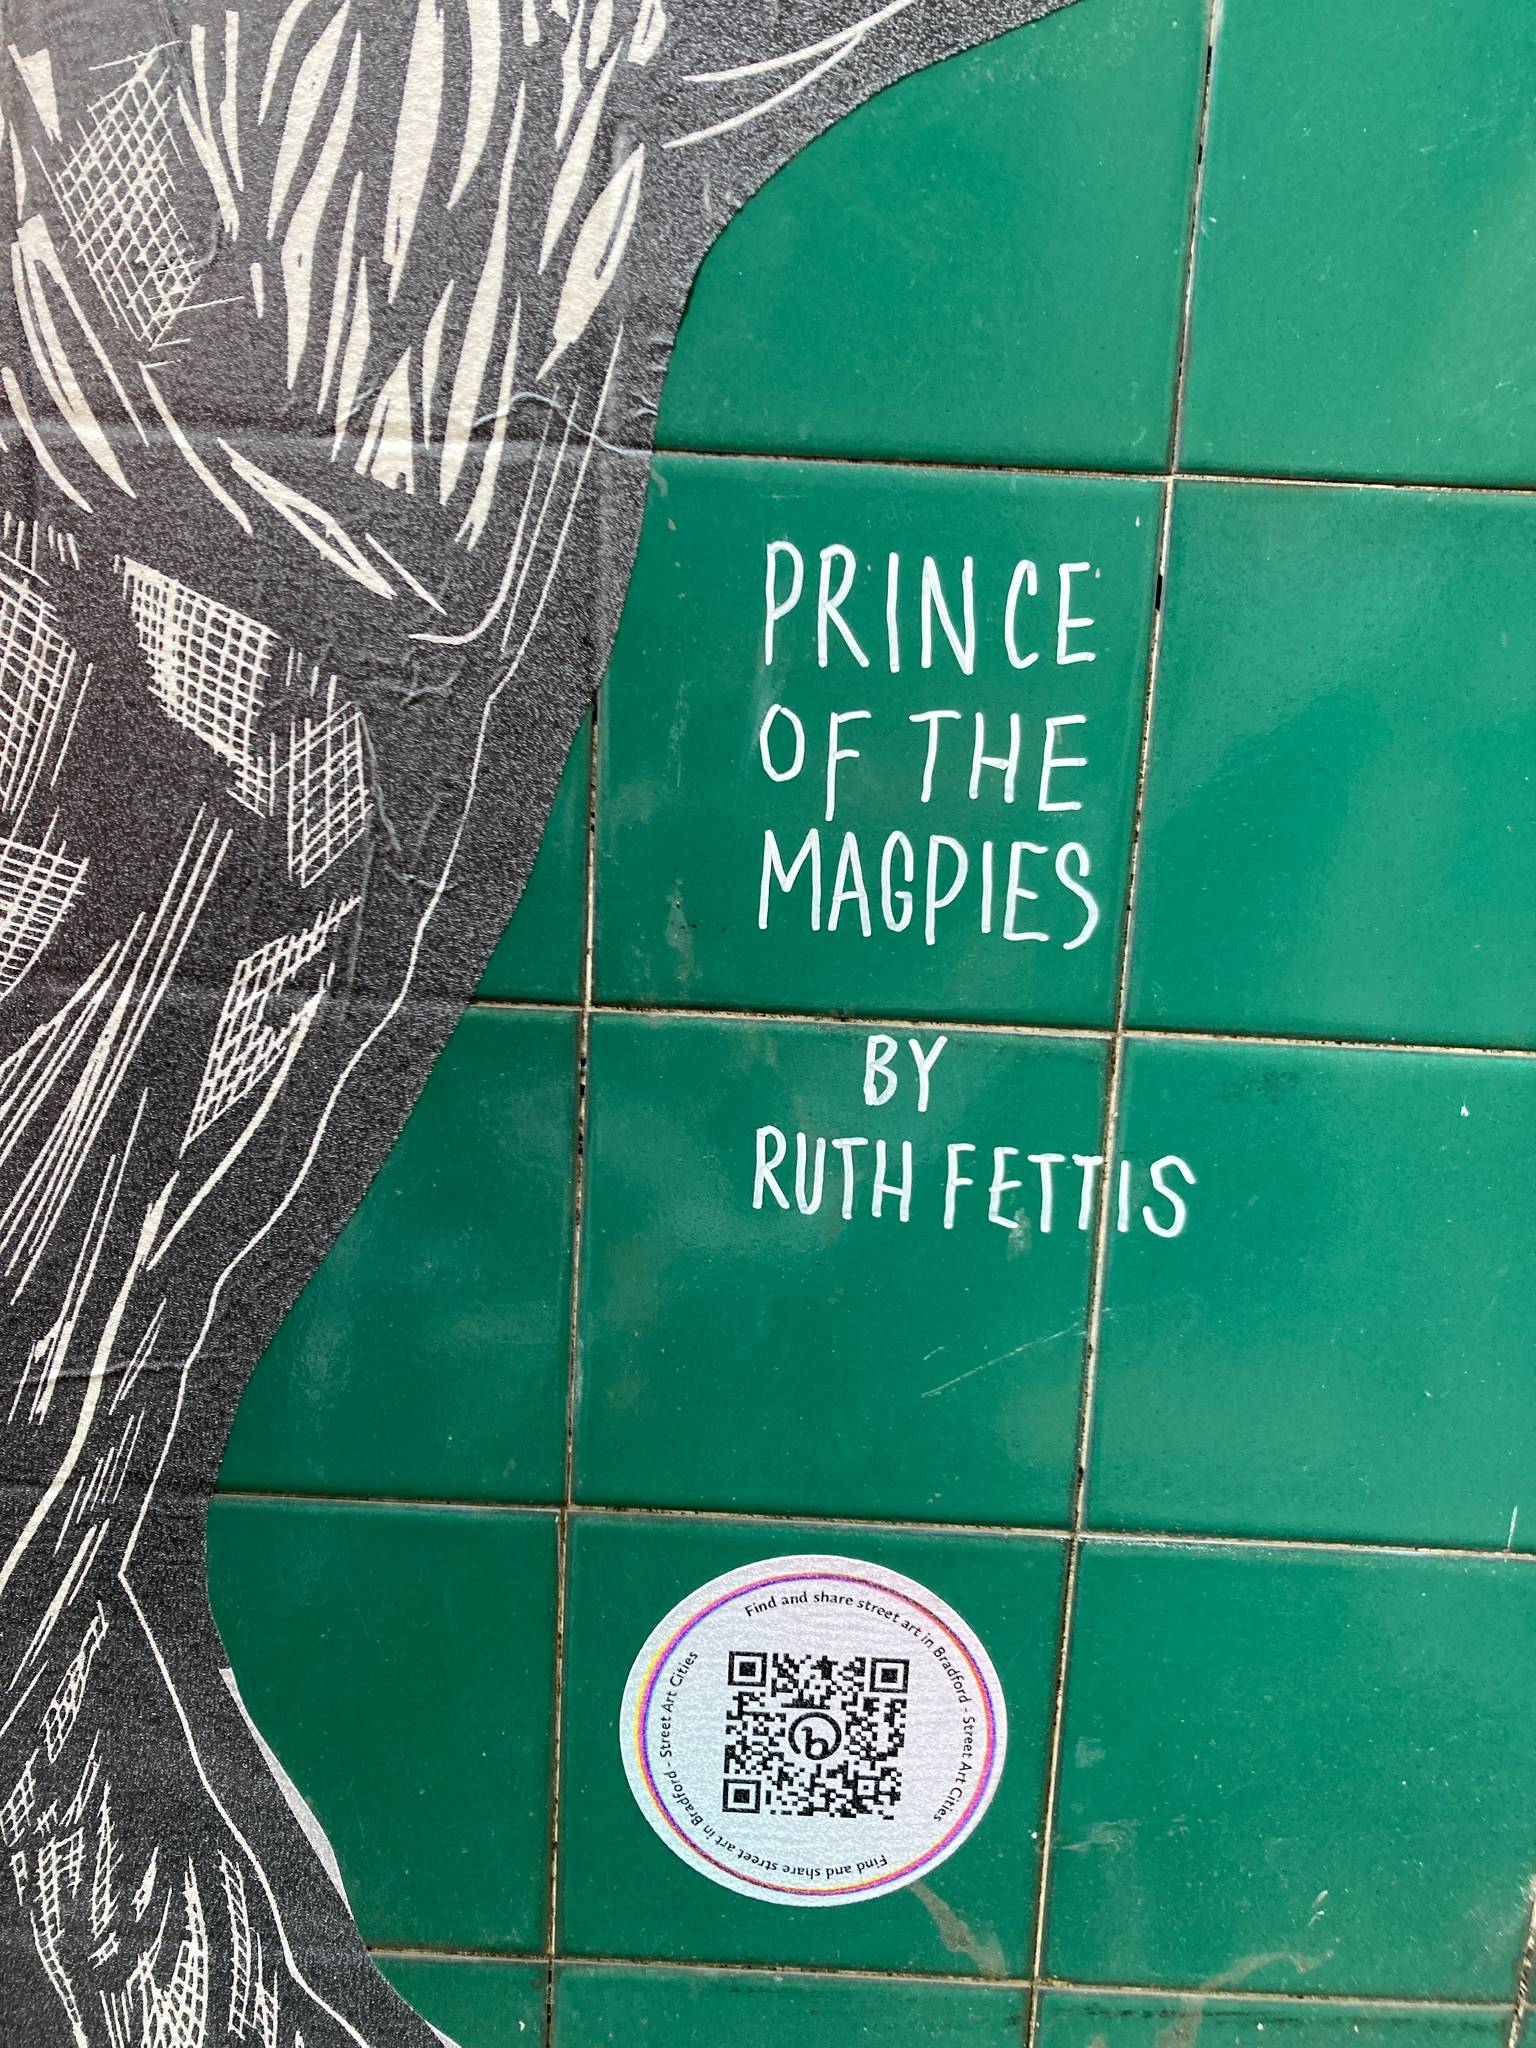 Ruth Fettis&mdash;Prince of the Magpies